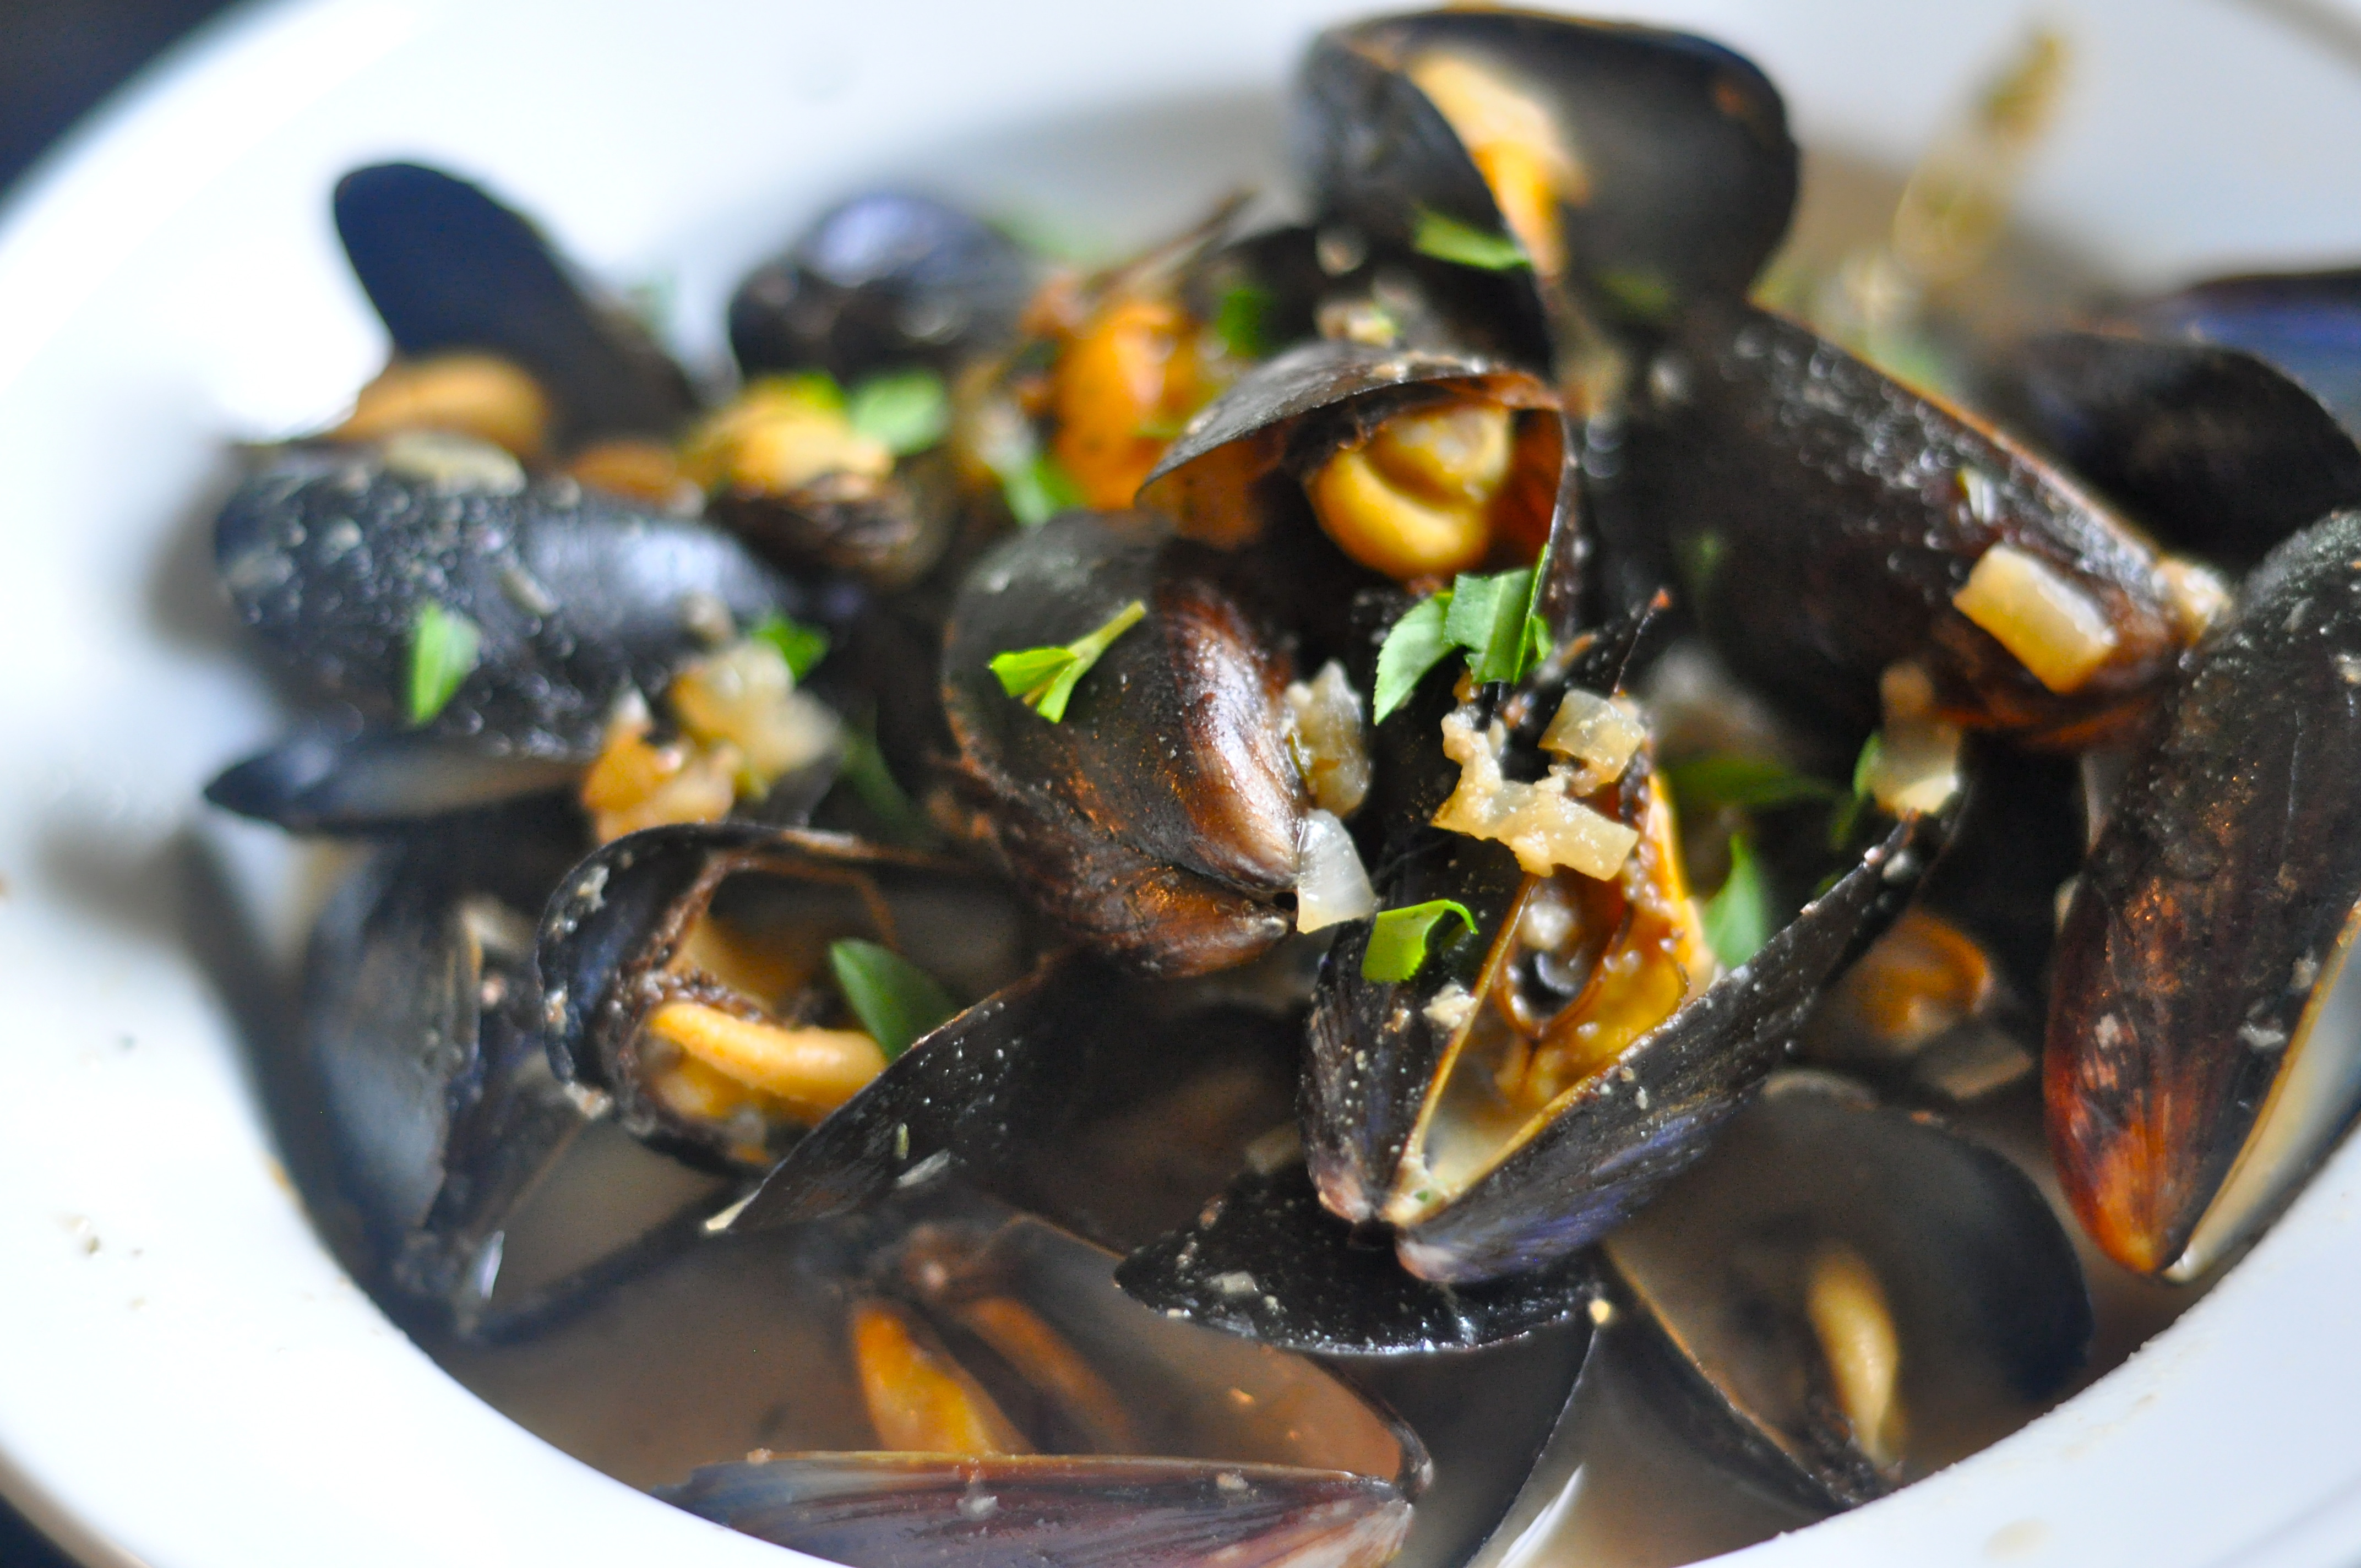 Football Season – Mediterranean Mussels Steamed in Pale Ale with Teardrop Tomatoes & Andouille Sausage